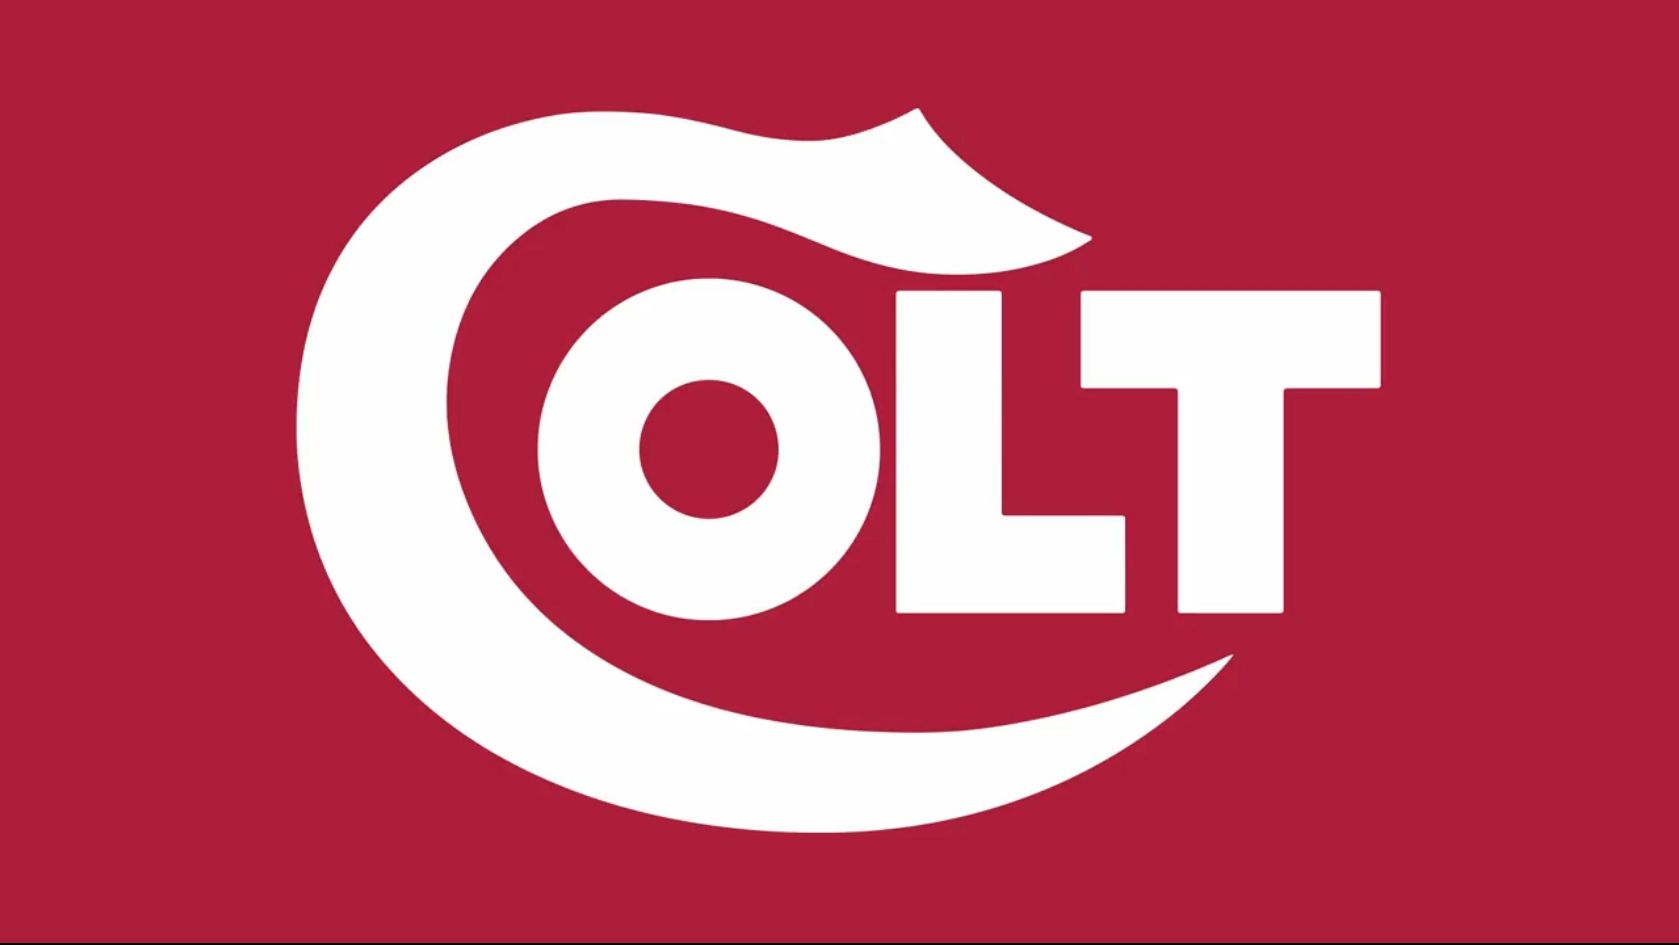 colt firearms logo iphone wallpapers